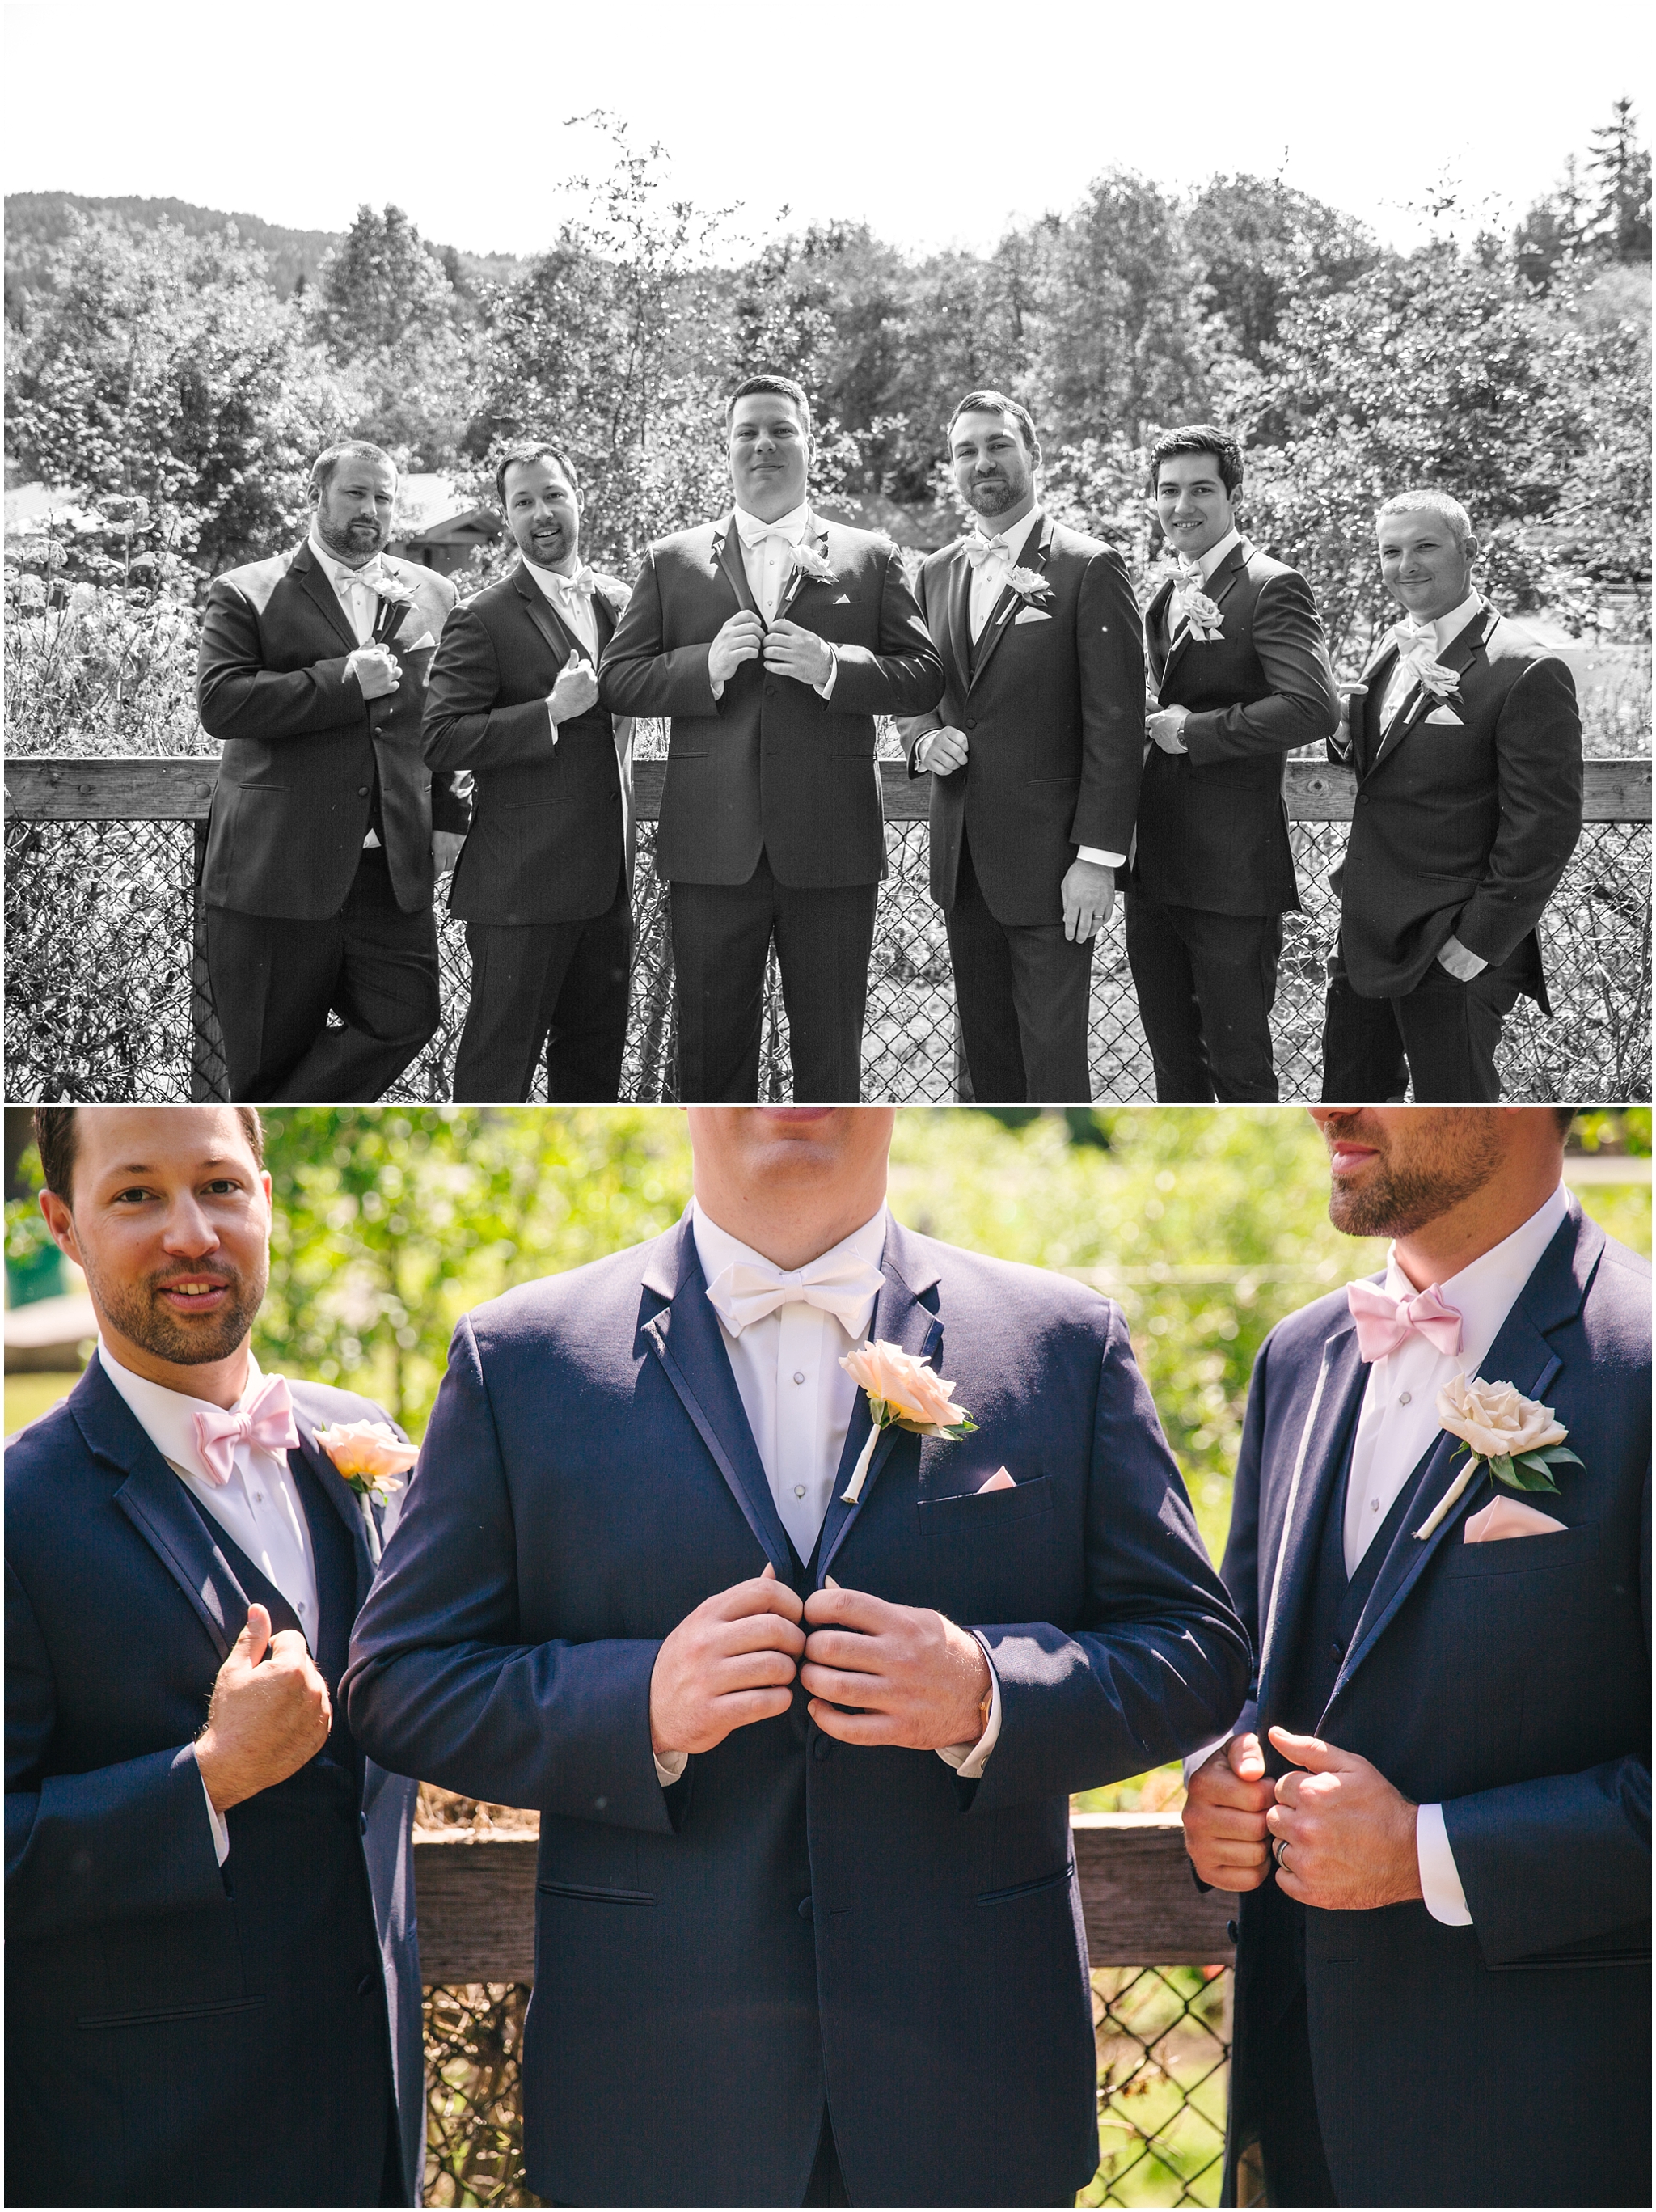 Groomsmen in navy suits at Issaquah Salmon Hatchery